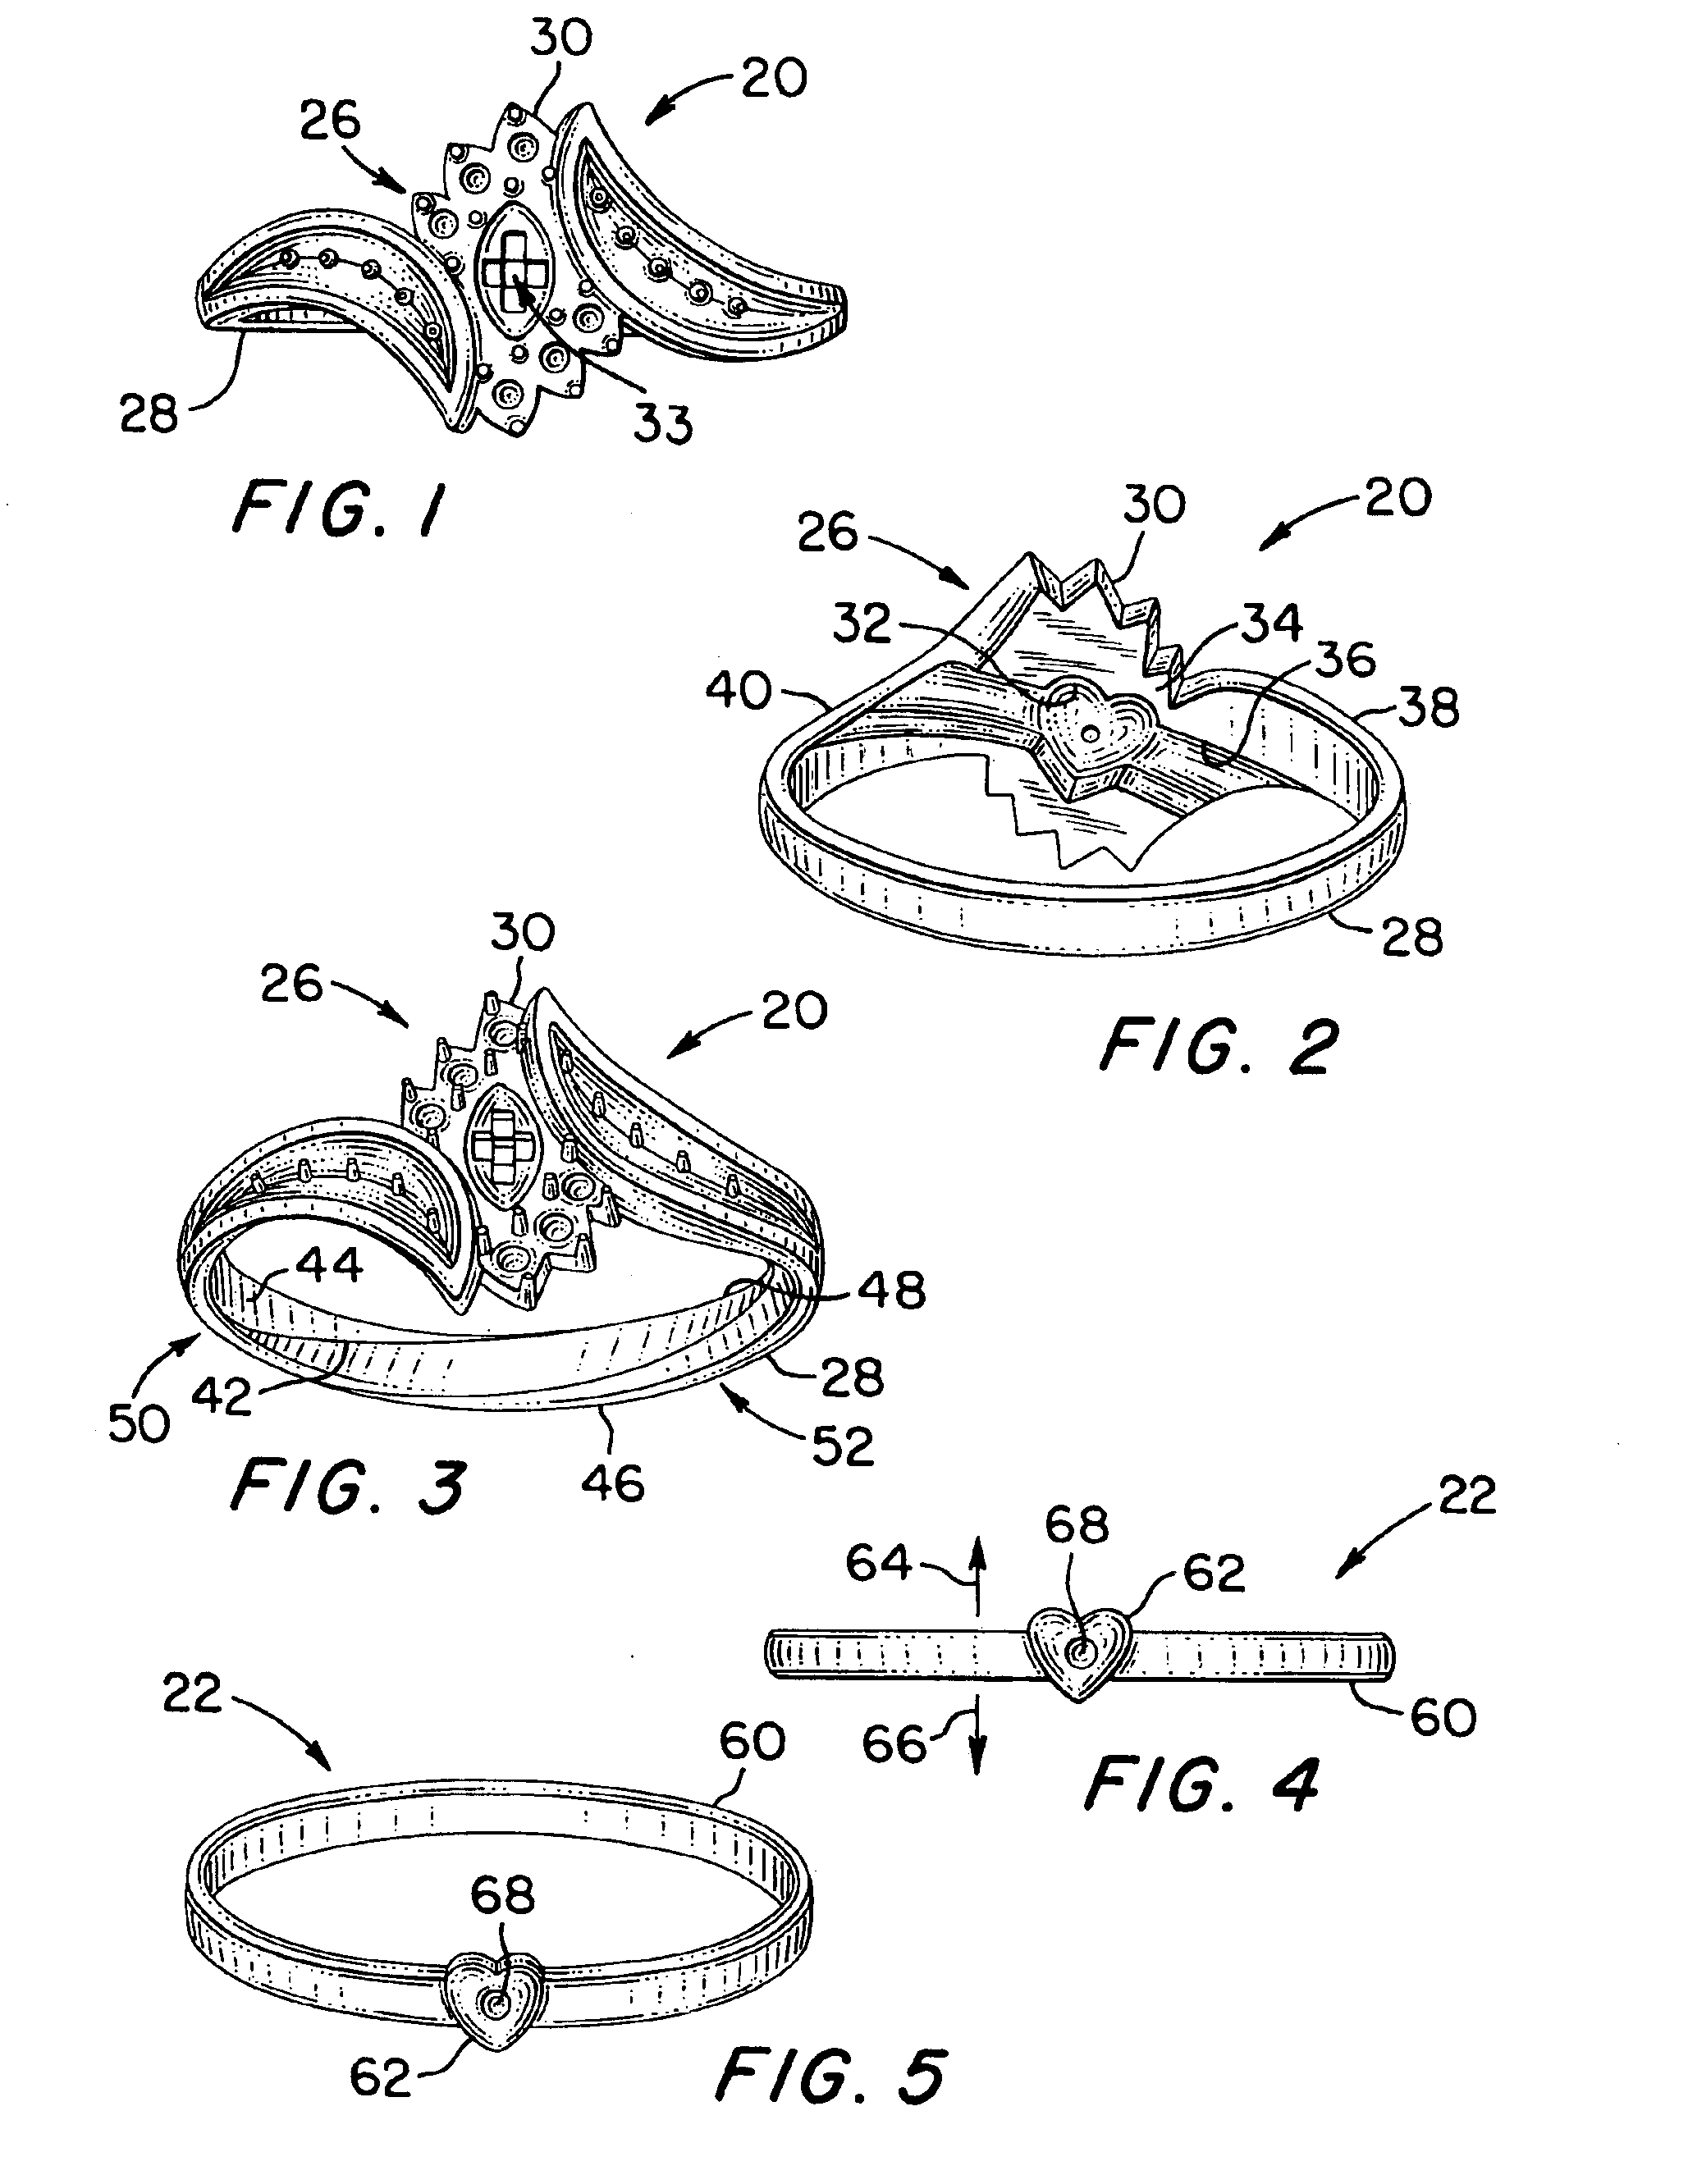 Engagement set with locking arrangement and rear crossover configuration